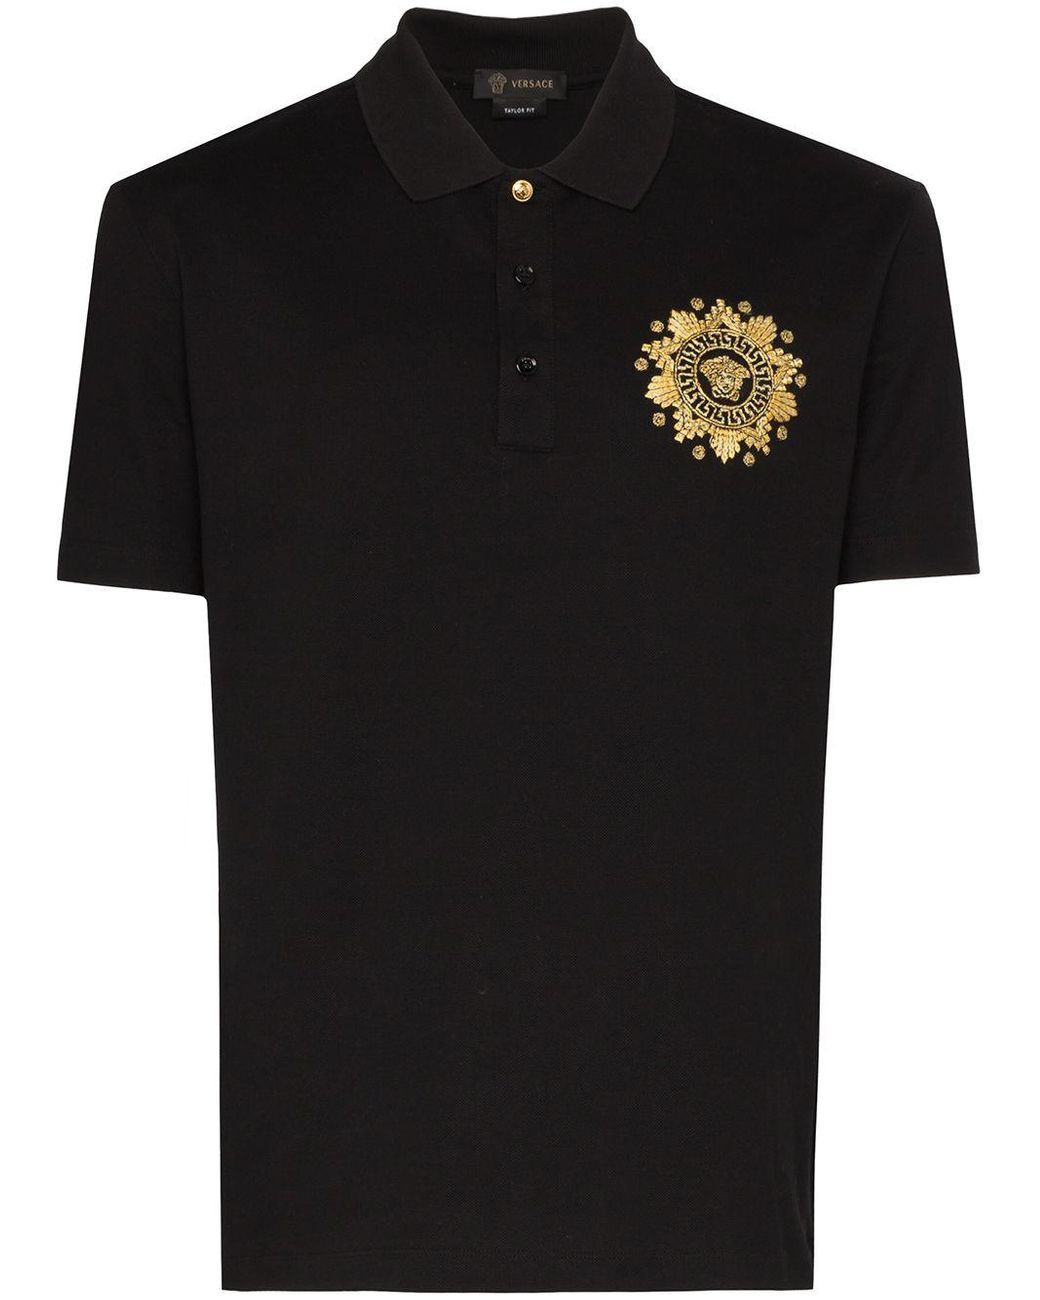 Versace Cotton Medusa Embroidered Polo Shirt in Black for Men - Lyst